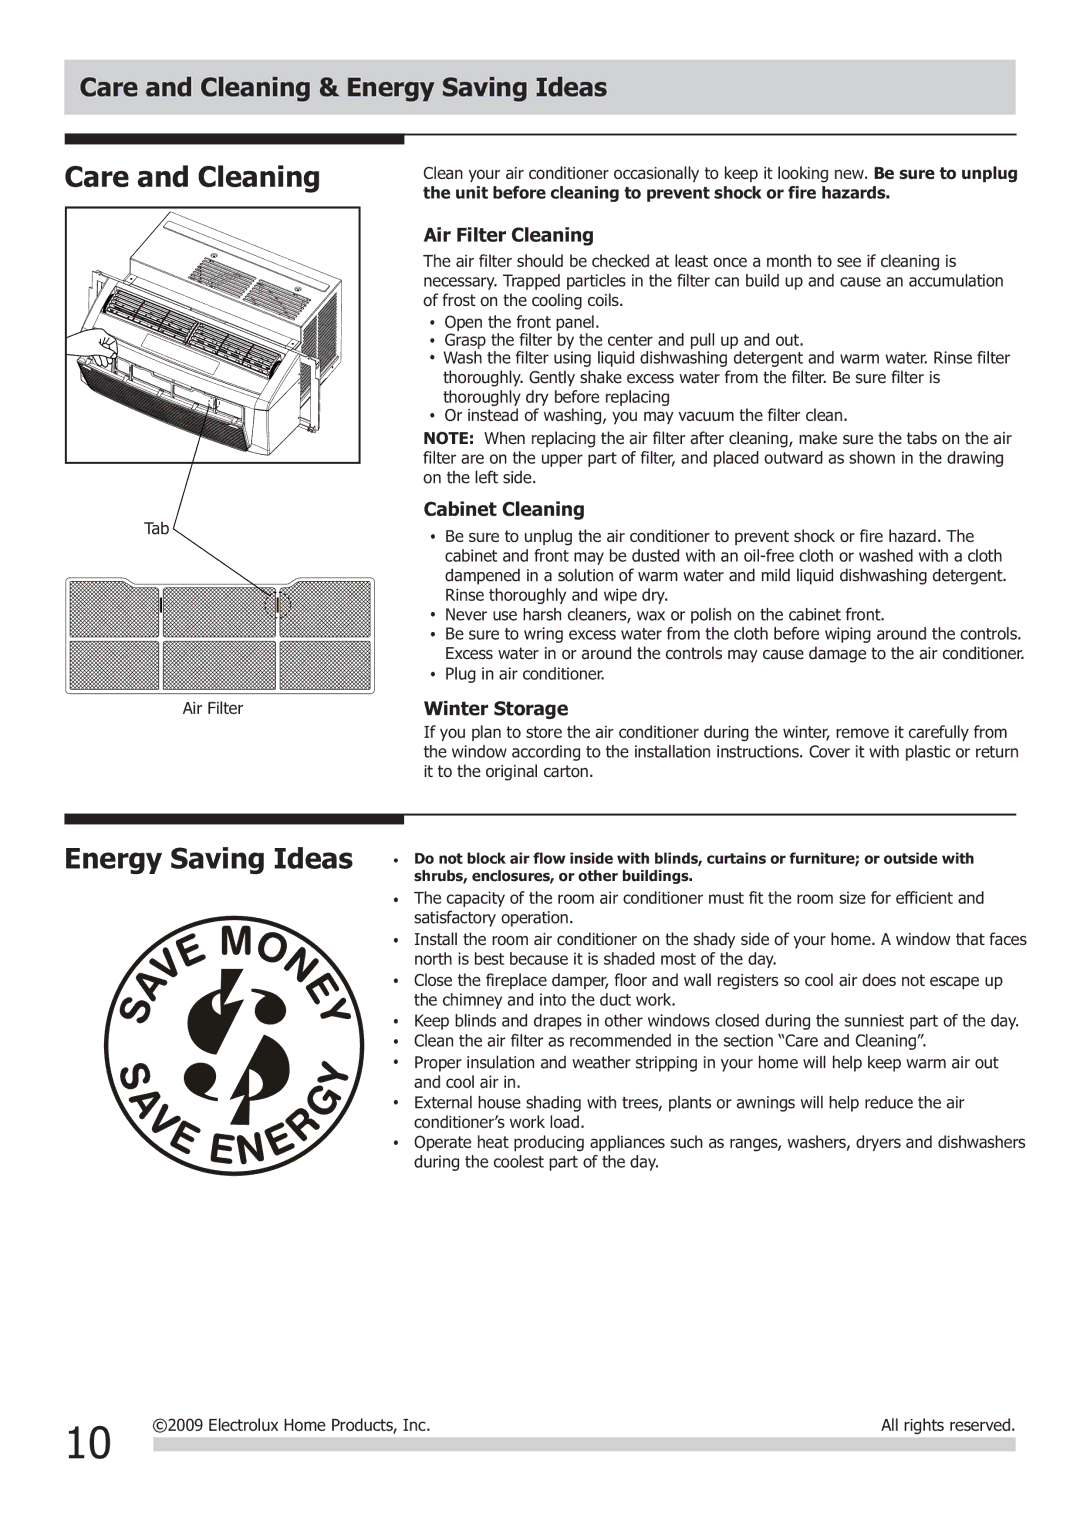 Frigidaire FRA064VU1 important safety instructions Care and Cleaning 